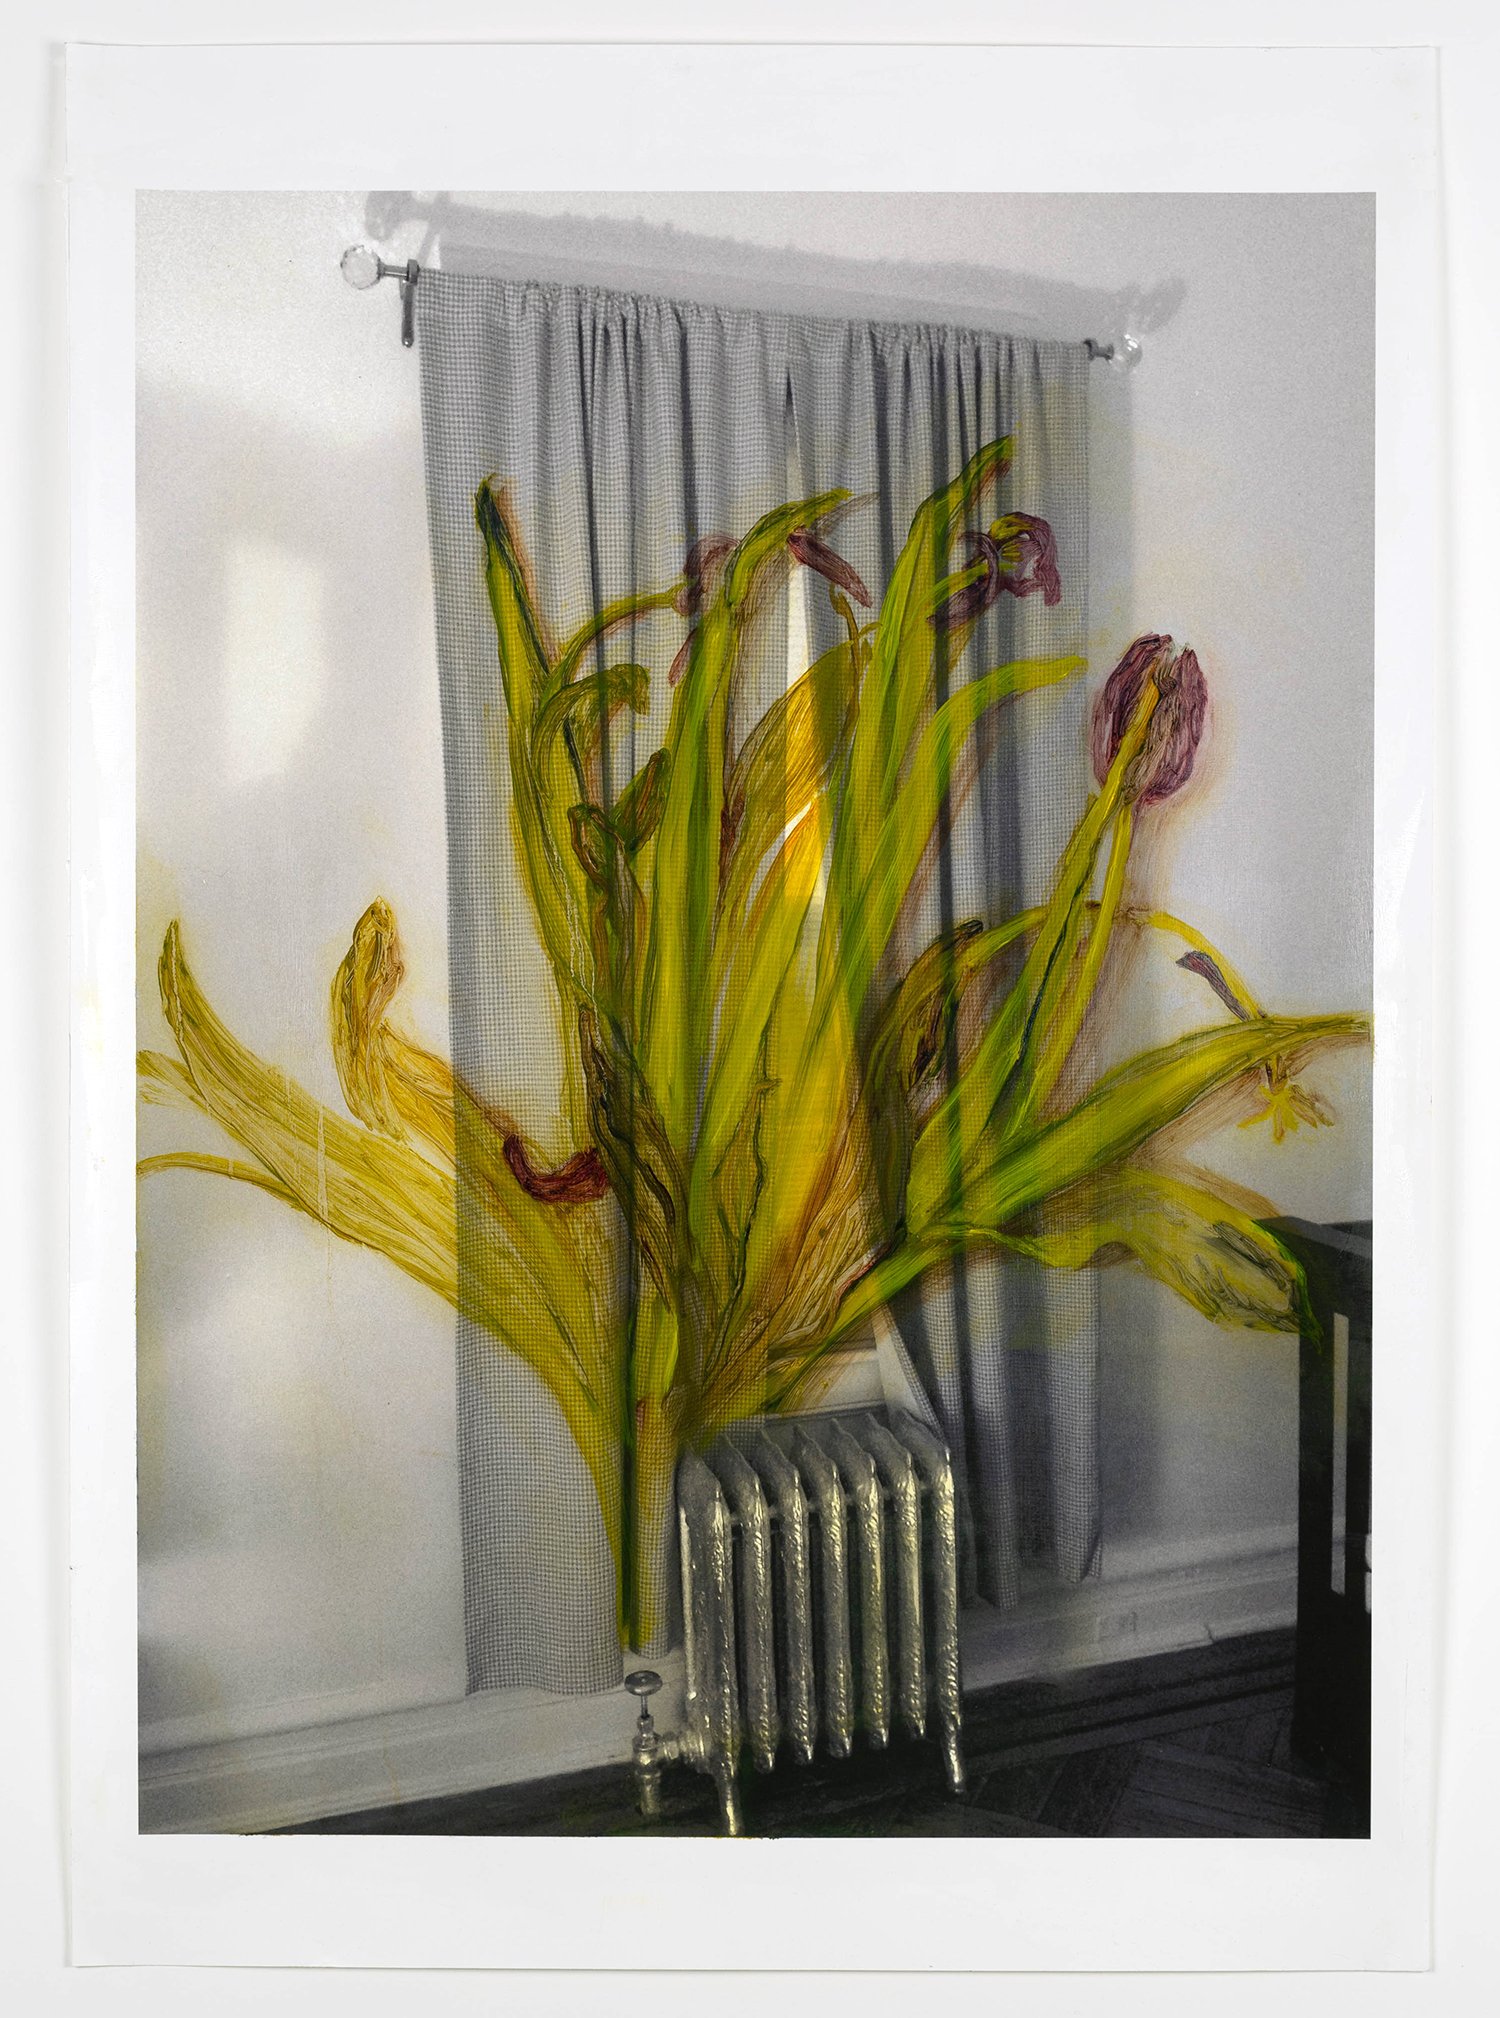 Tulips Over the Radiator (Or, How to Make Home)